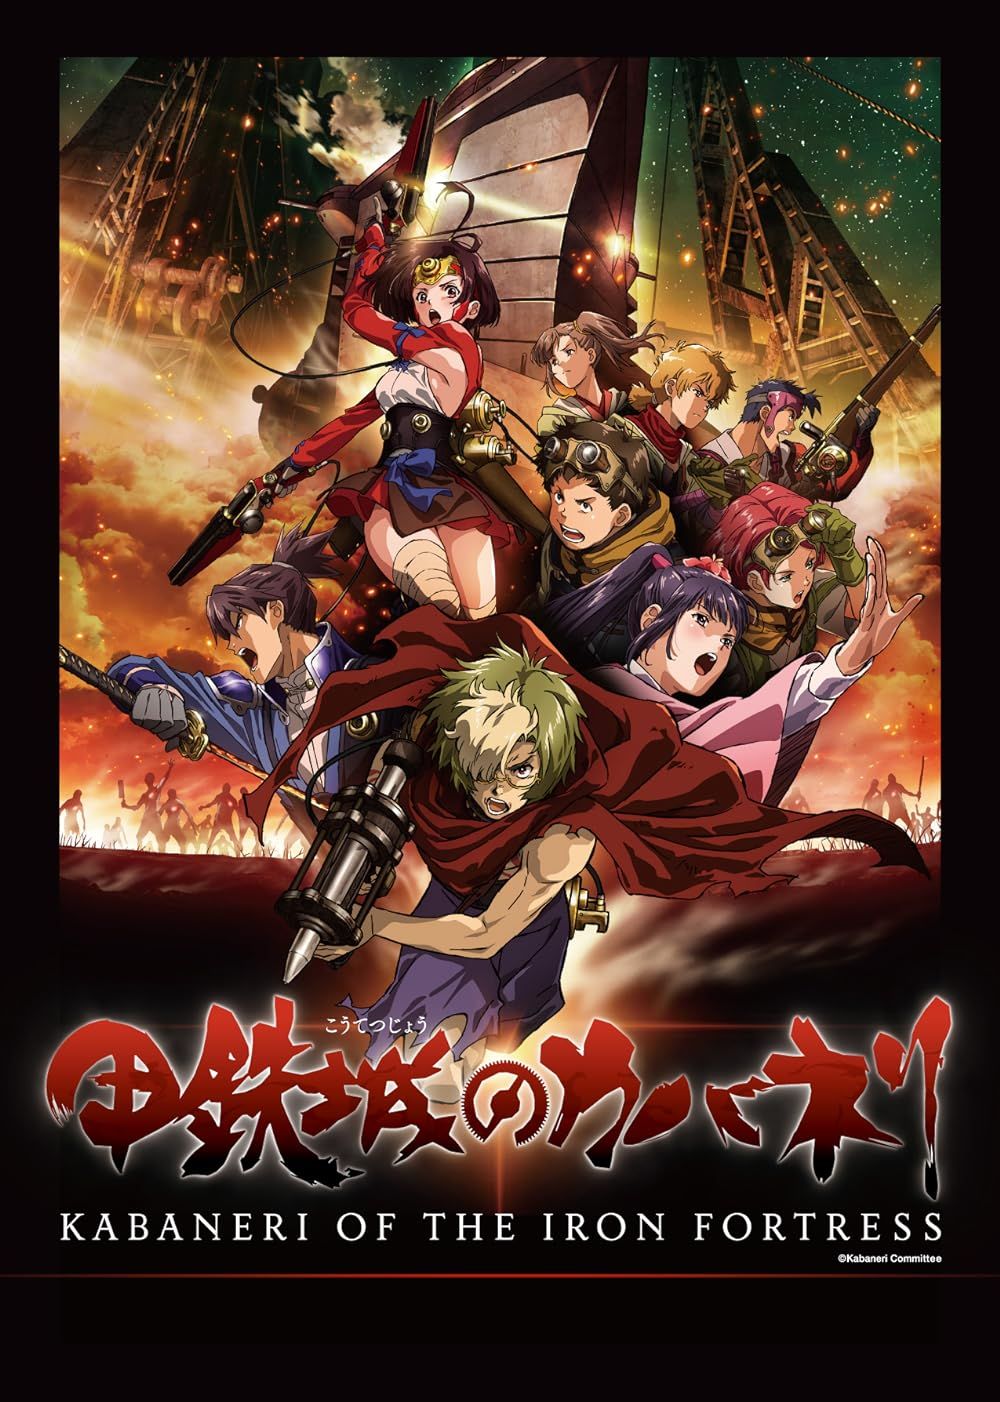 Poster of Kabaneri of the Iron Fortress with many characters fighting in a battle against a ship